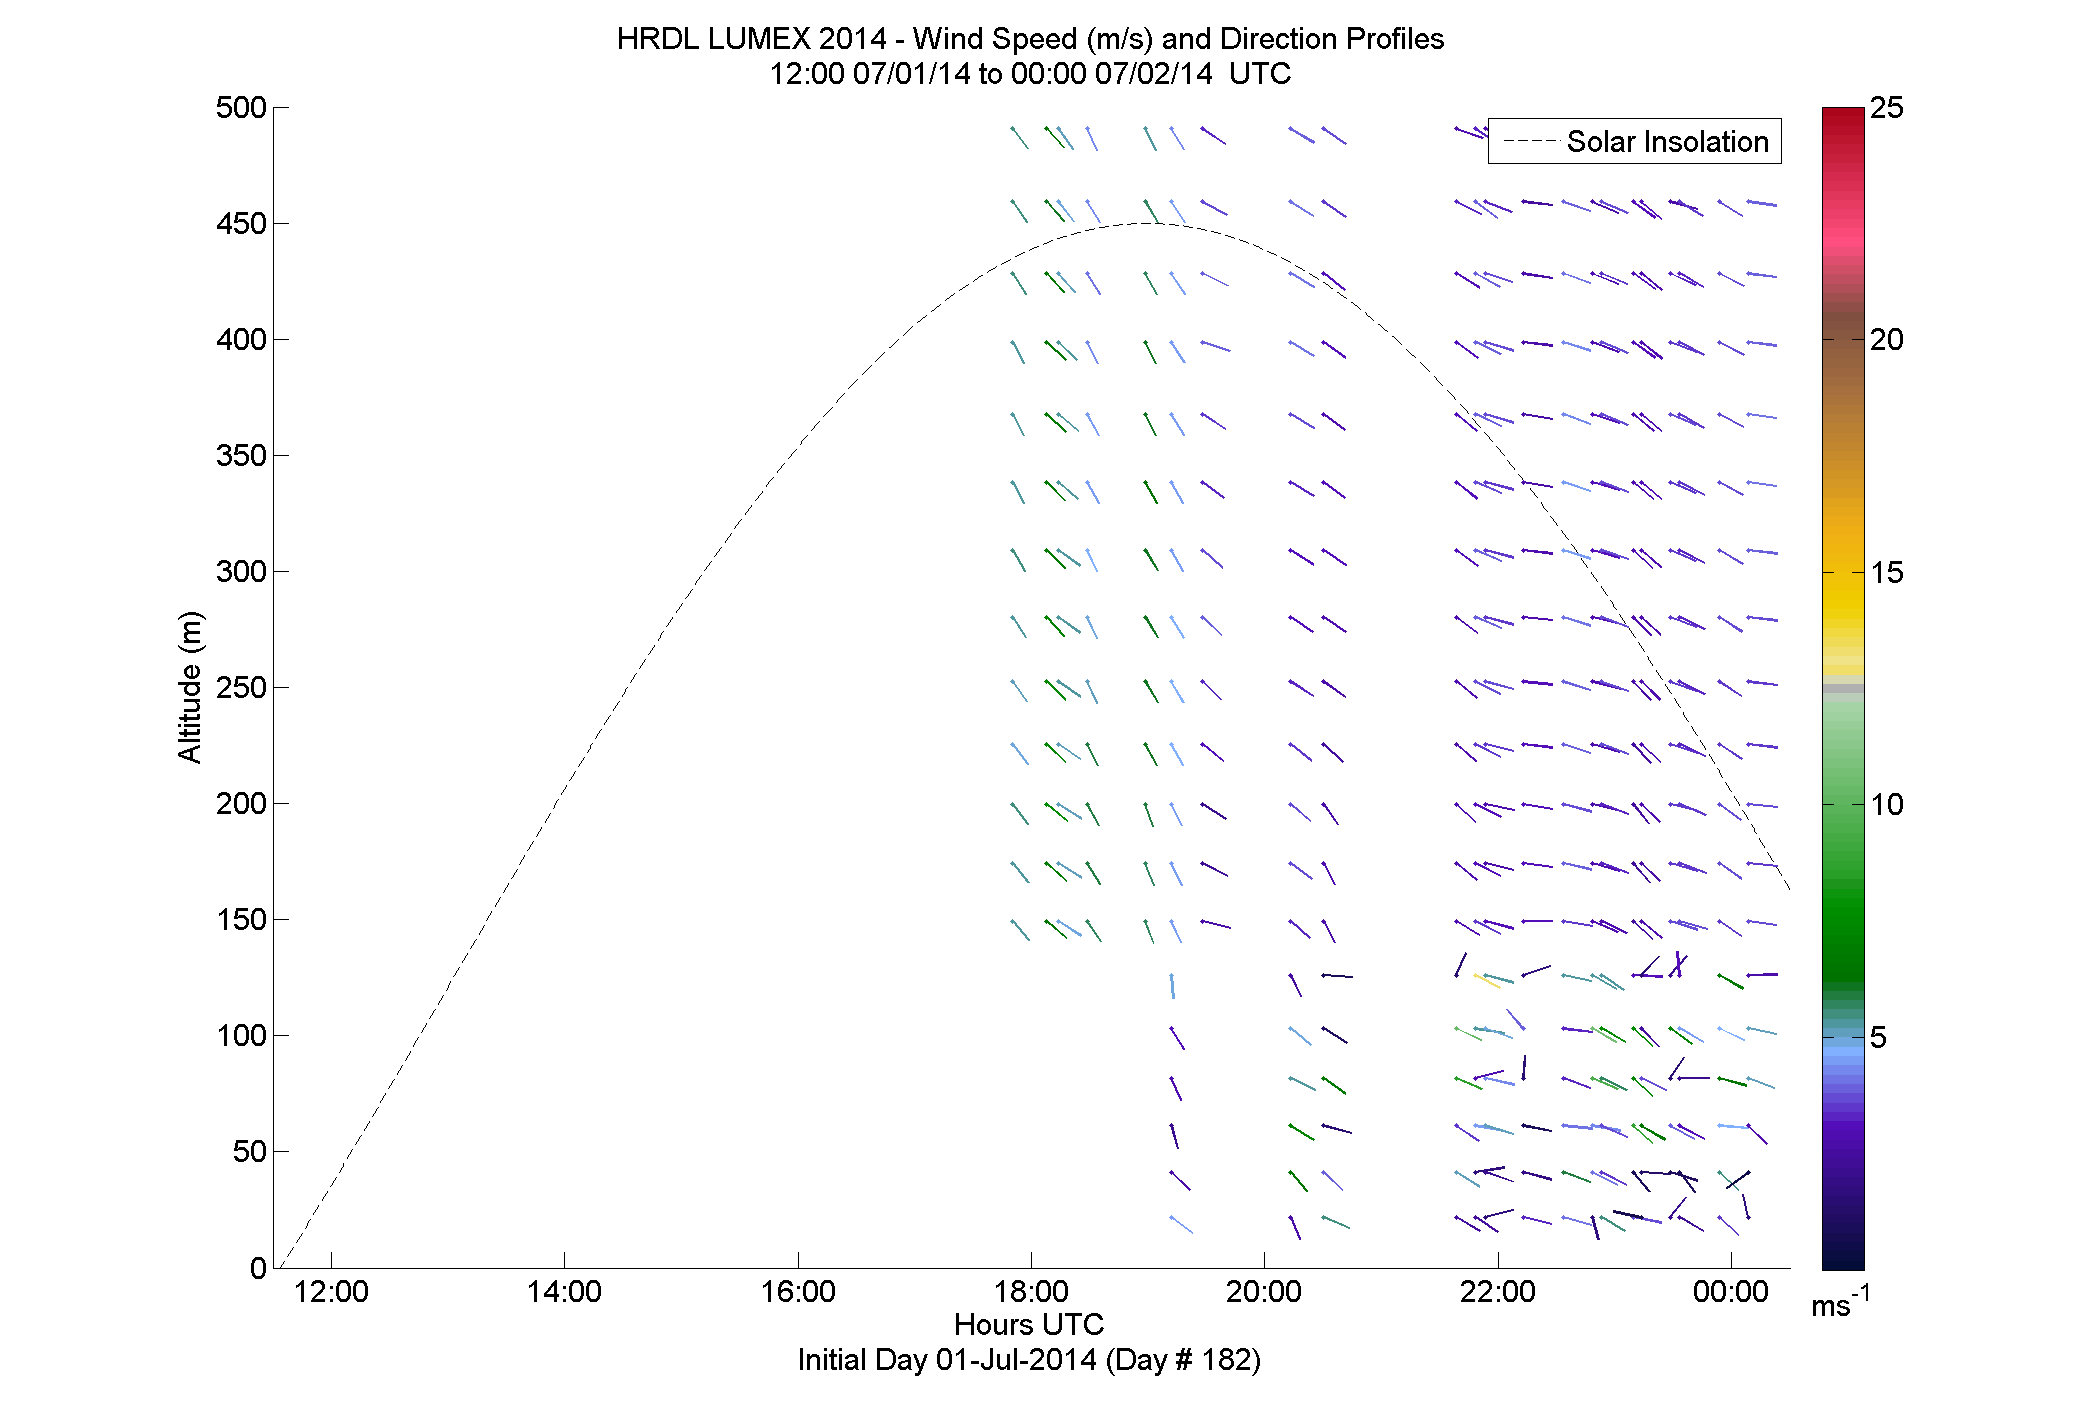 HRDL speed and direction profile - July 1 pm